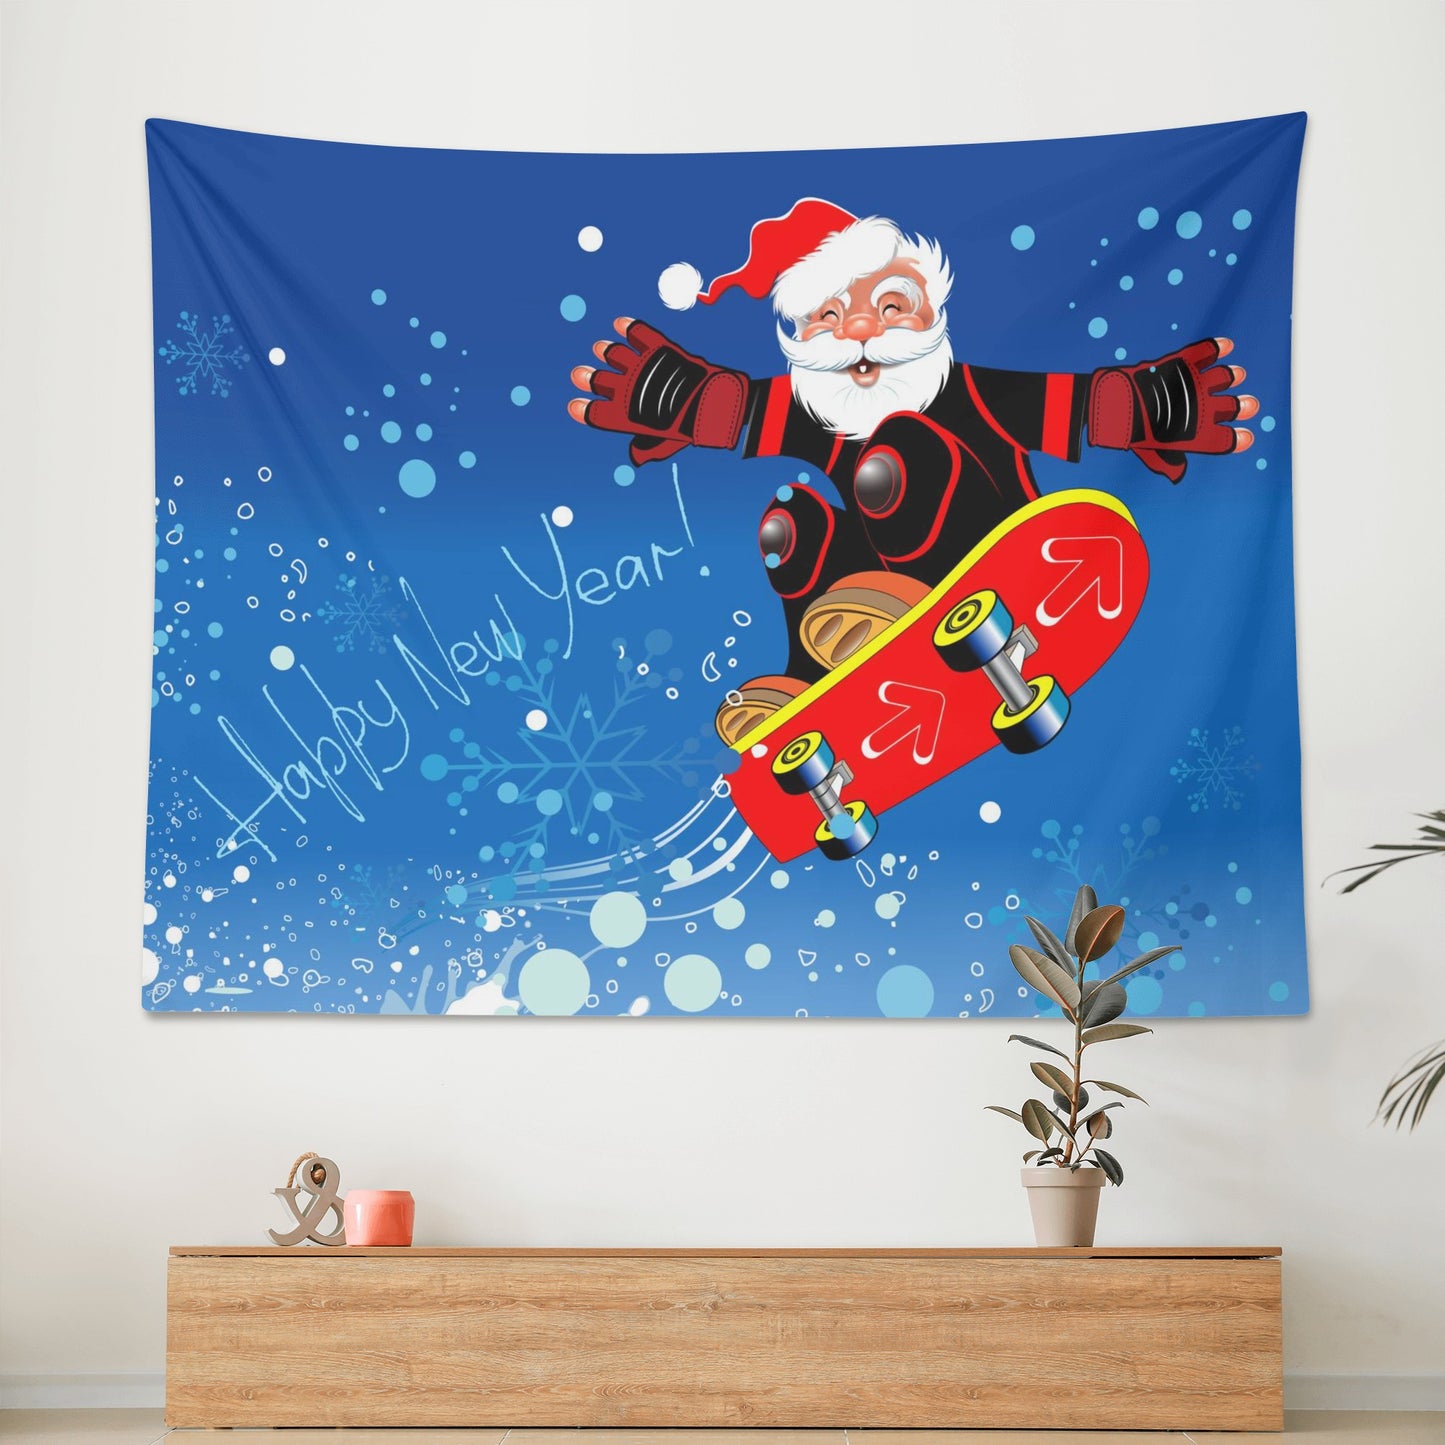 A Skate Boarding Santa for Christmas Polyester Peach Skin Wall Tapestry 6 Sizes